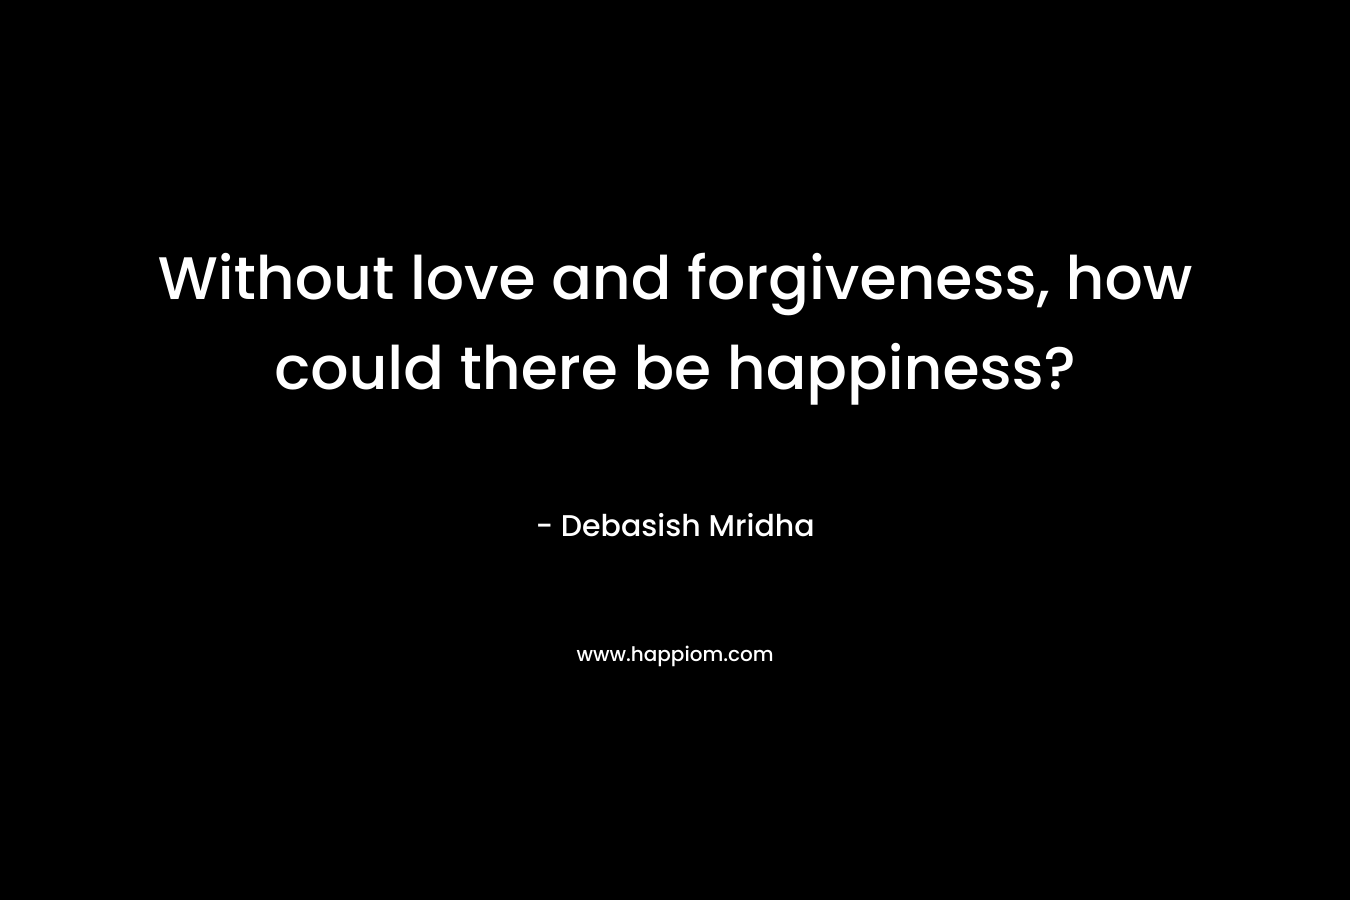 Without love and forgiveness, how could there be happiness?